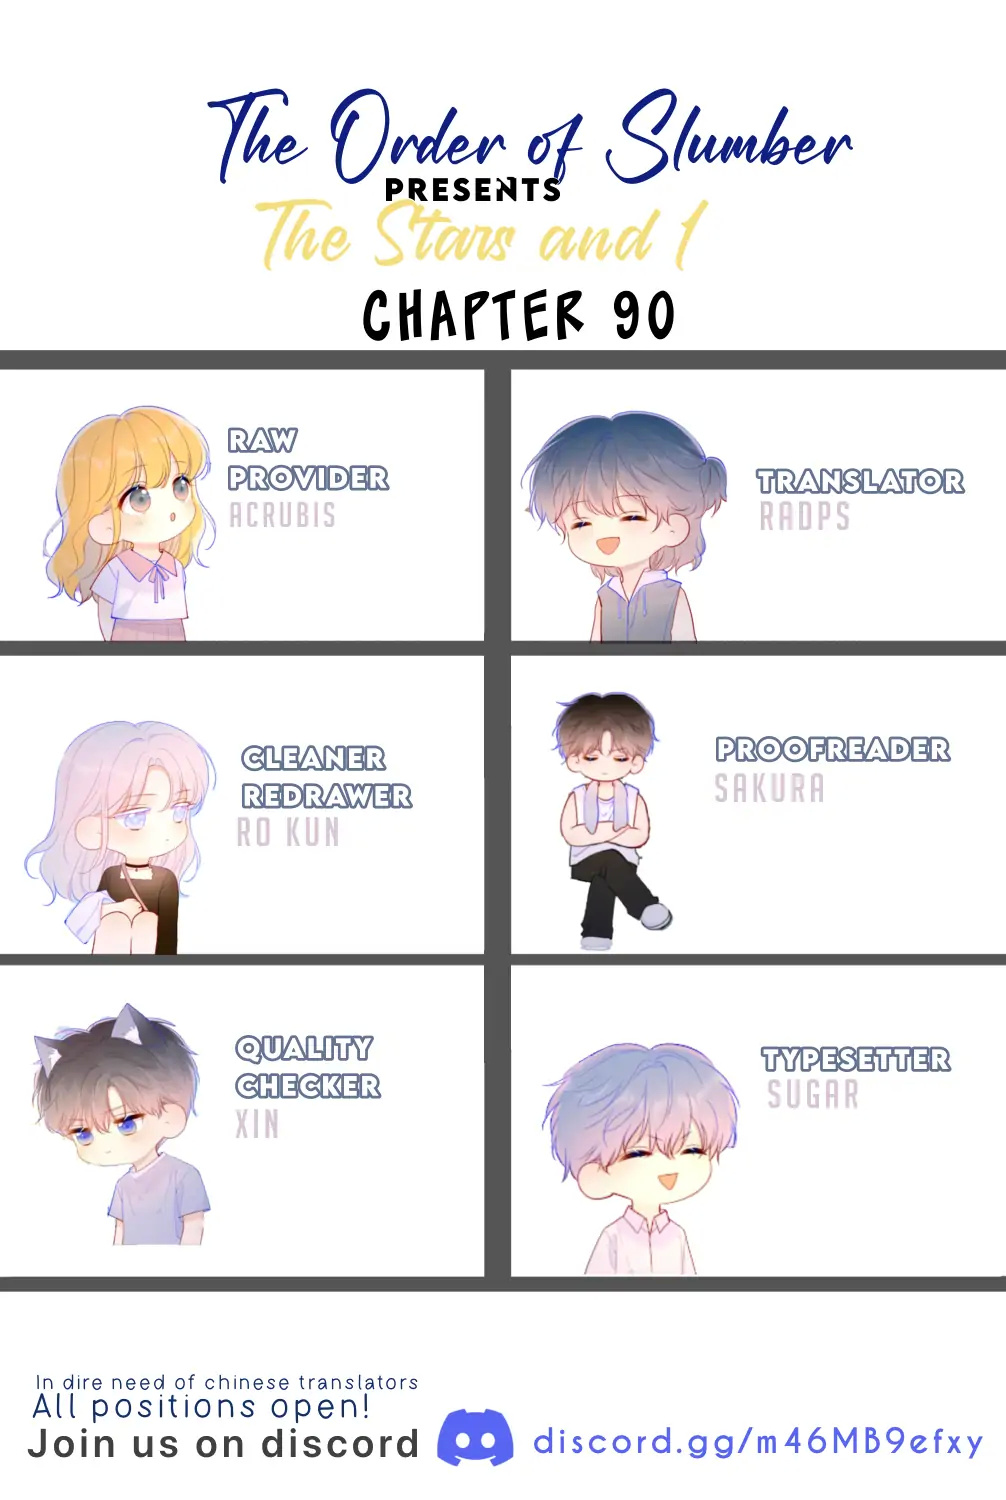 The Stars and I Chapter 90